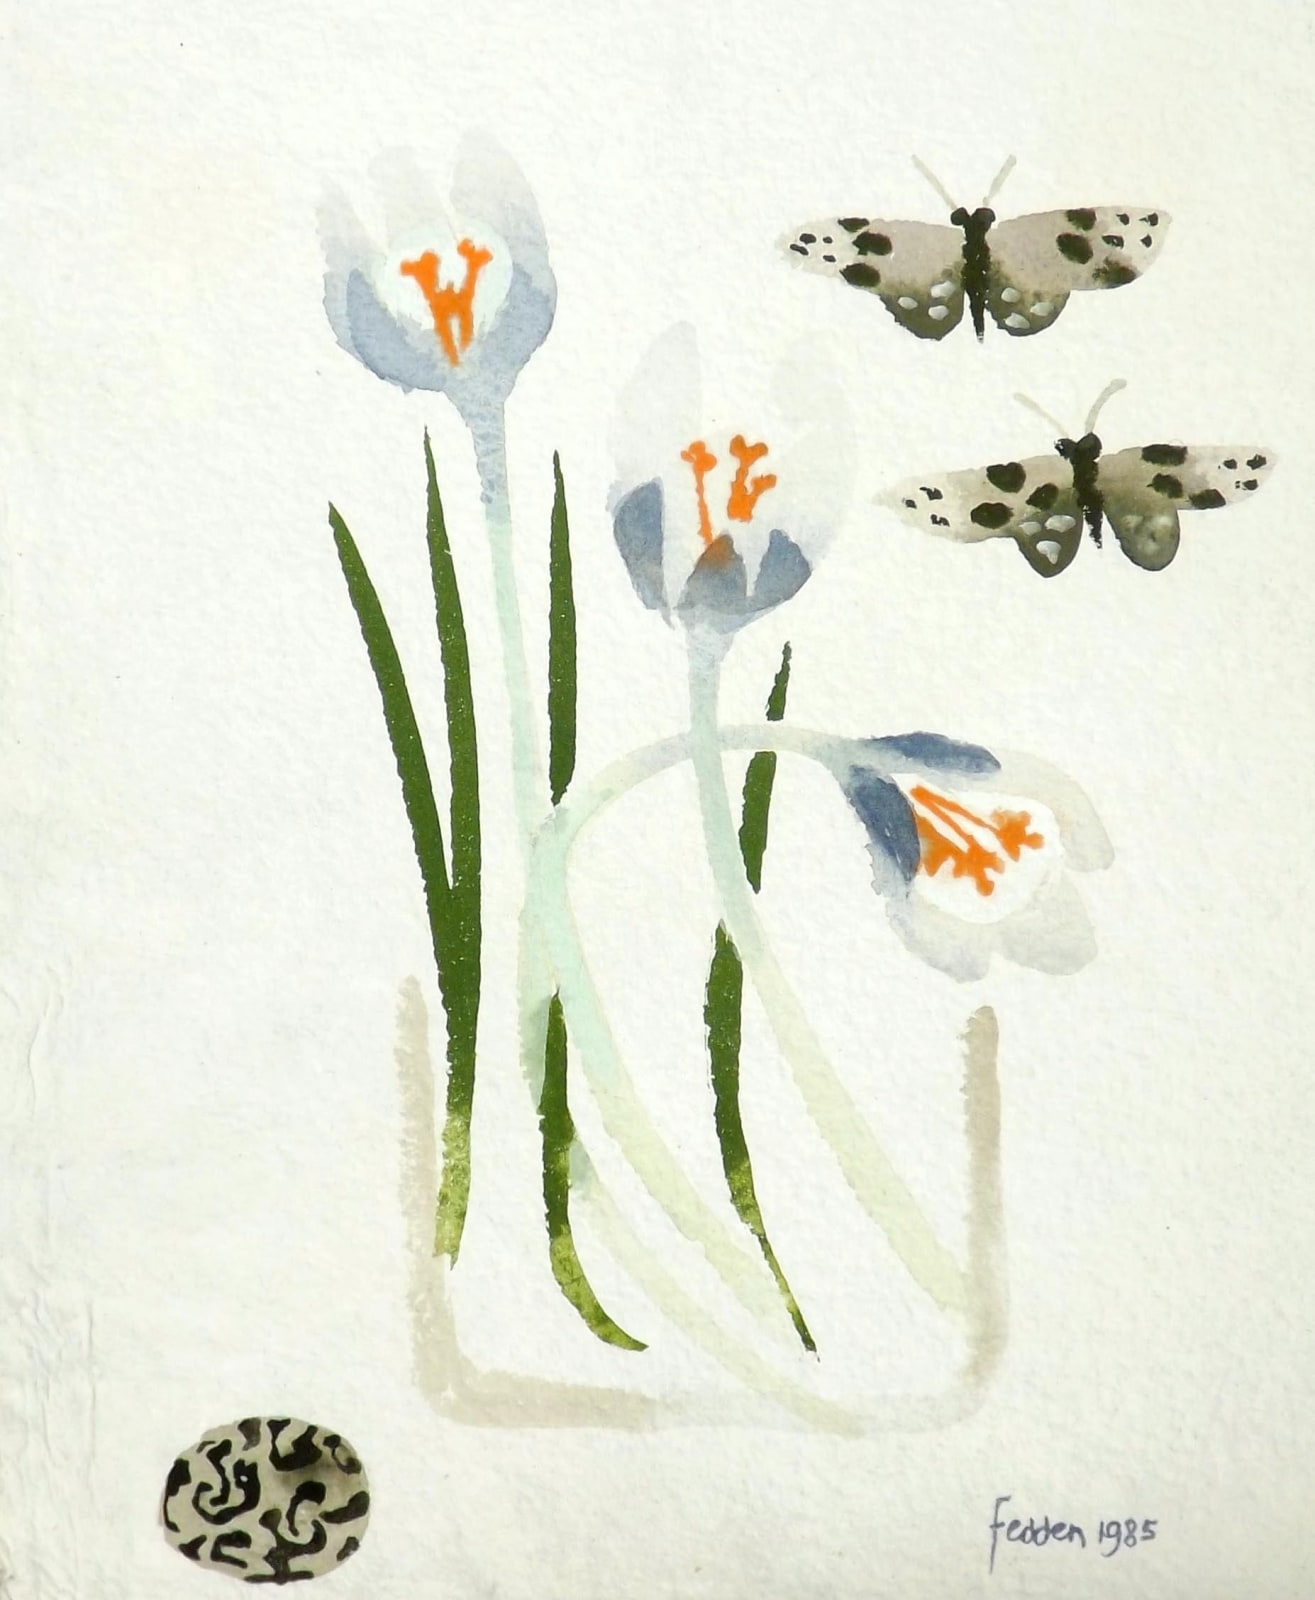 Mary Fedden, Tulips and butterflies, 1985